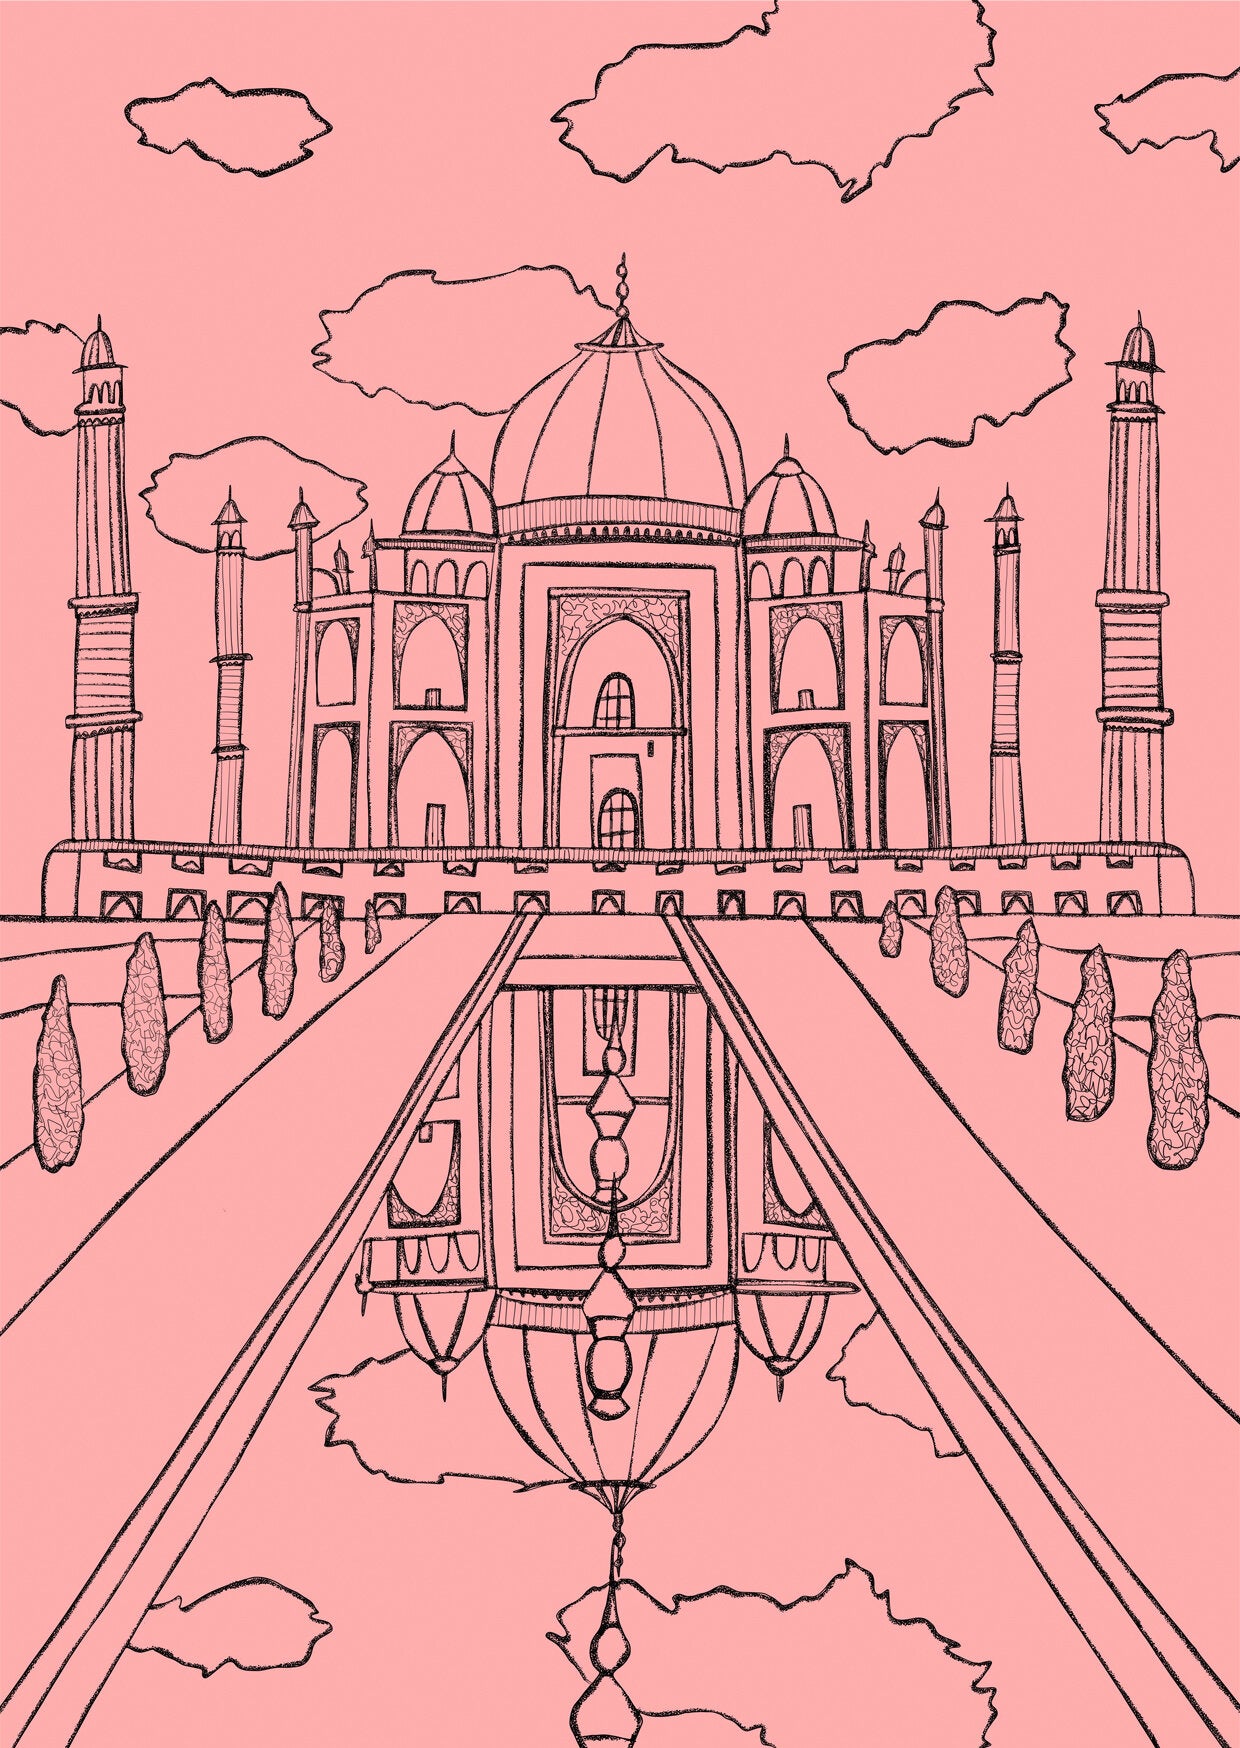 Three drawings of the Taj Mahal | Unknown | V&A Explore The Collections